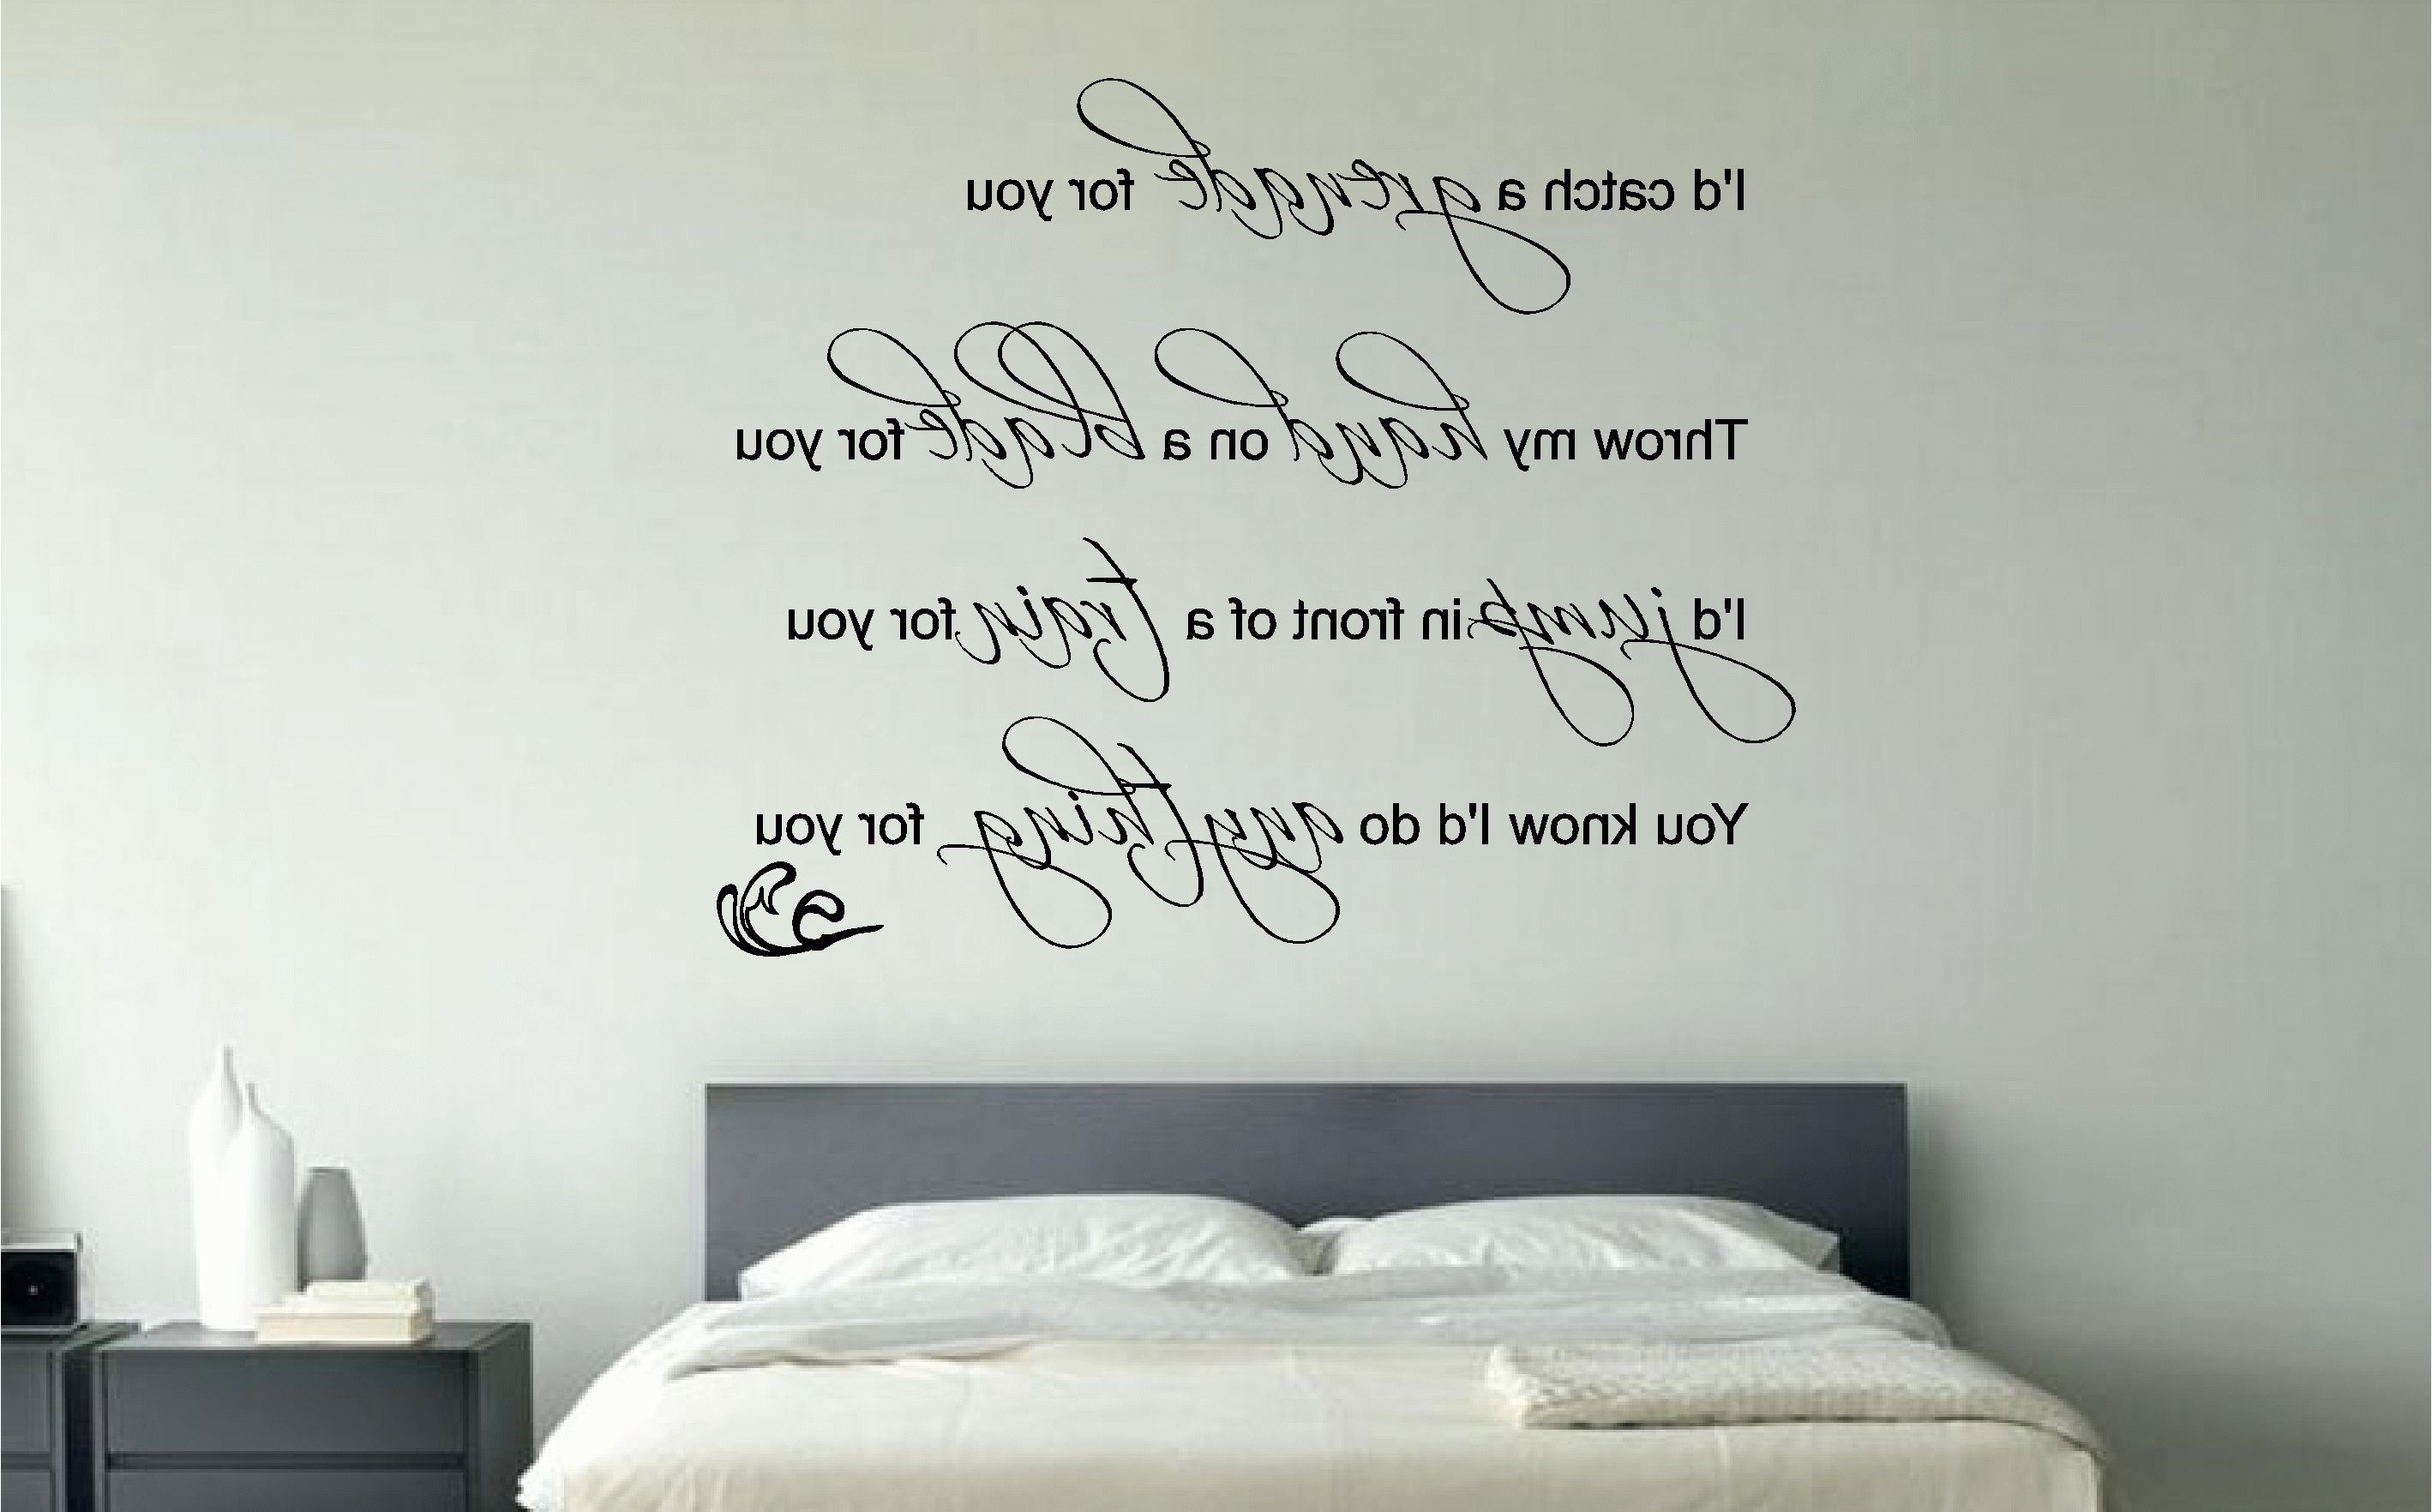 Bedroom Wall Art Pertaining To Most Current Bruno Mars Grenade Lyrics Music Wall Art Sticker Decal Bedroom (View 2 of 15)